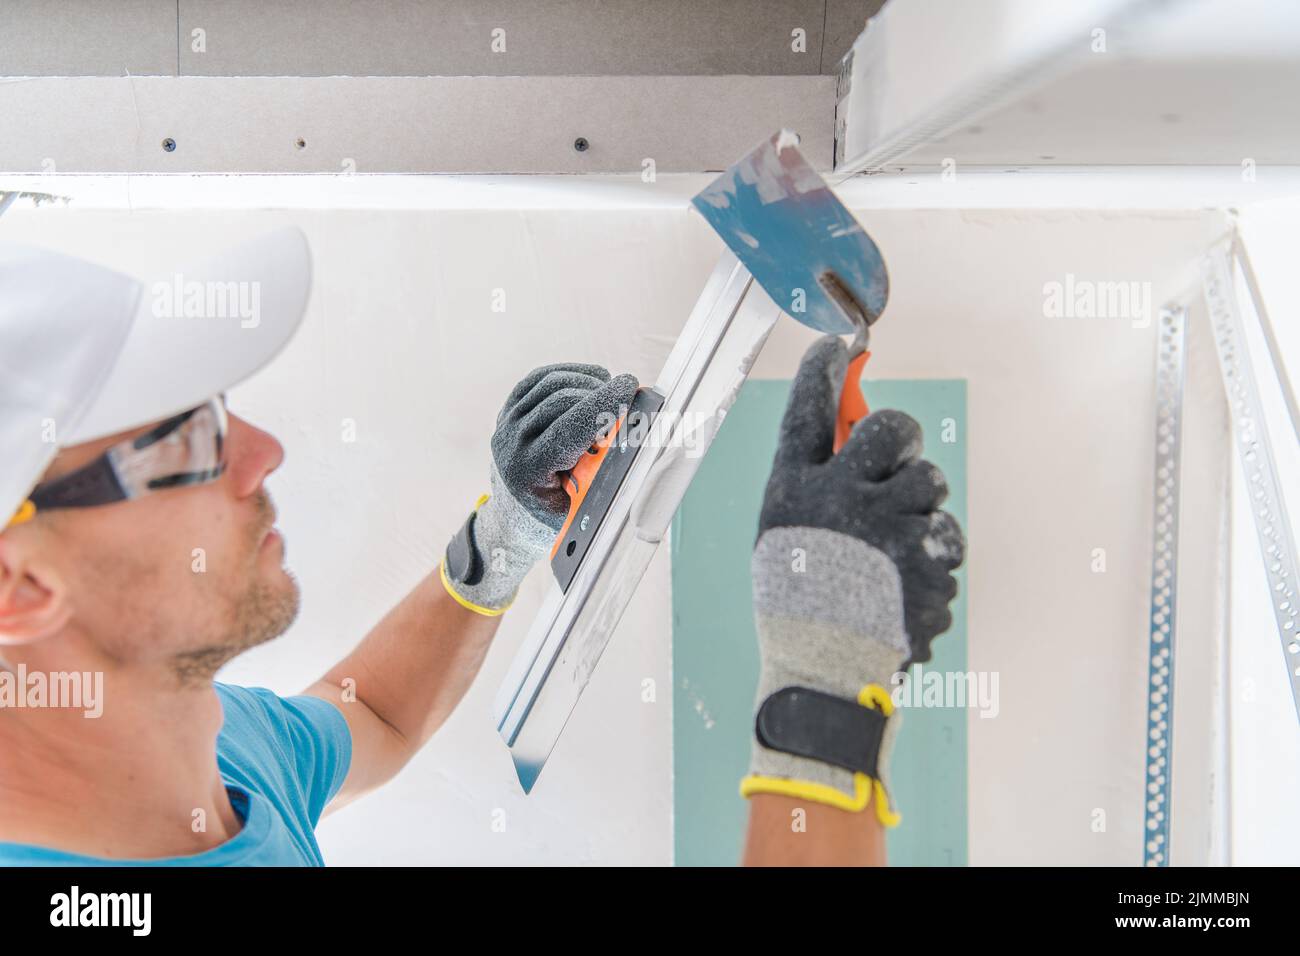 Closeup of the Male Worker Applying Gypsum Wall Putty with Scrapper Putty Knife Tool. House Renovation Work Theme. Stock Photo